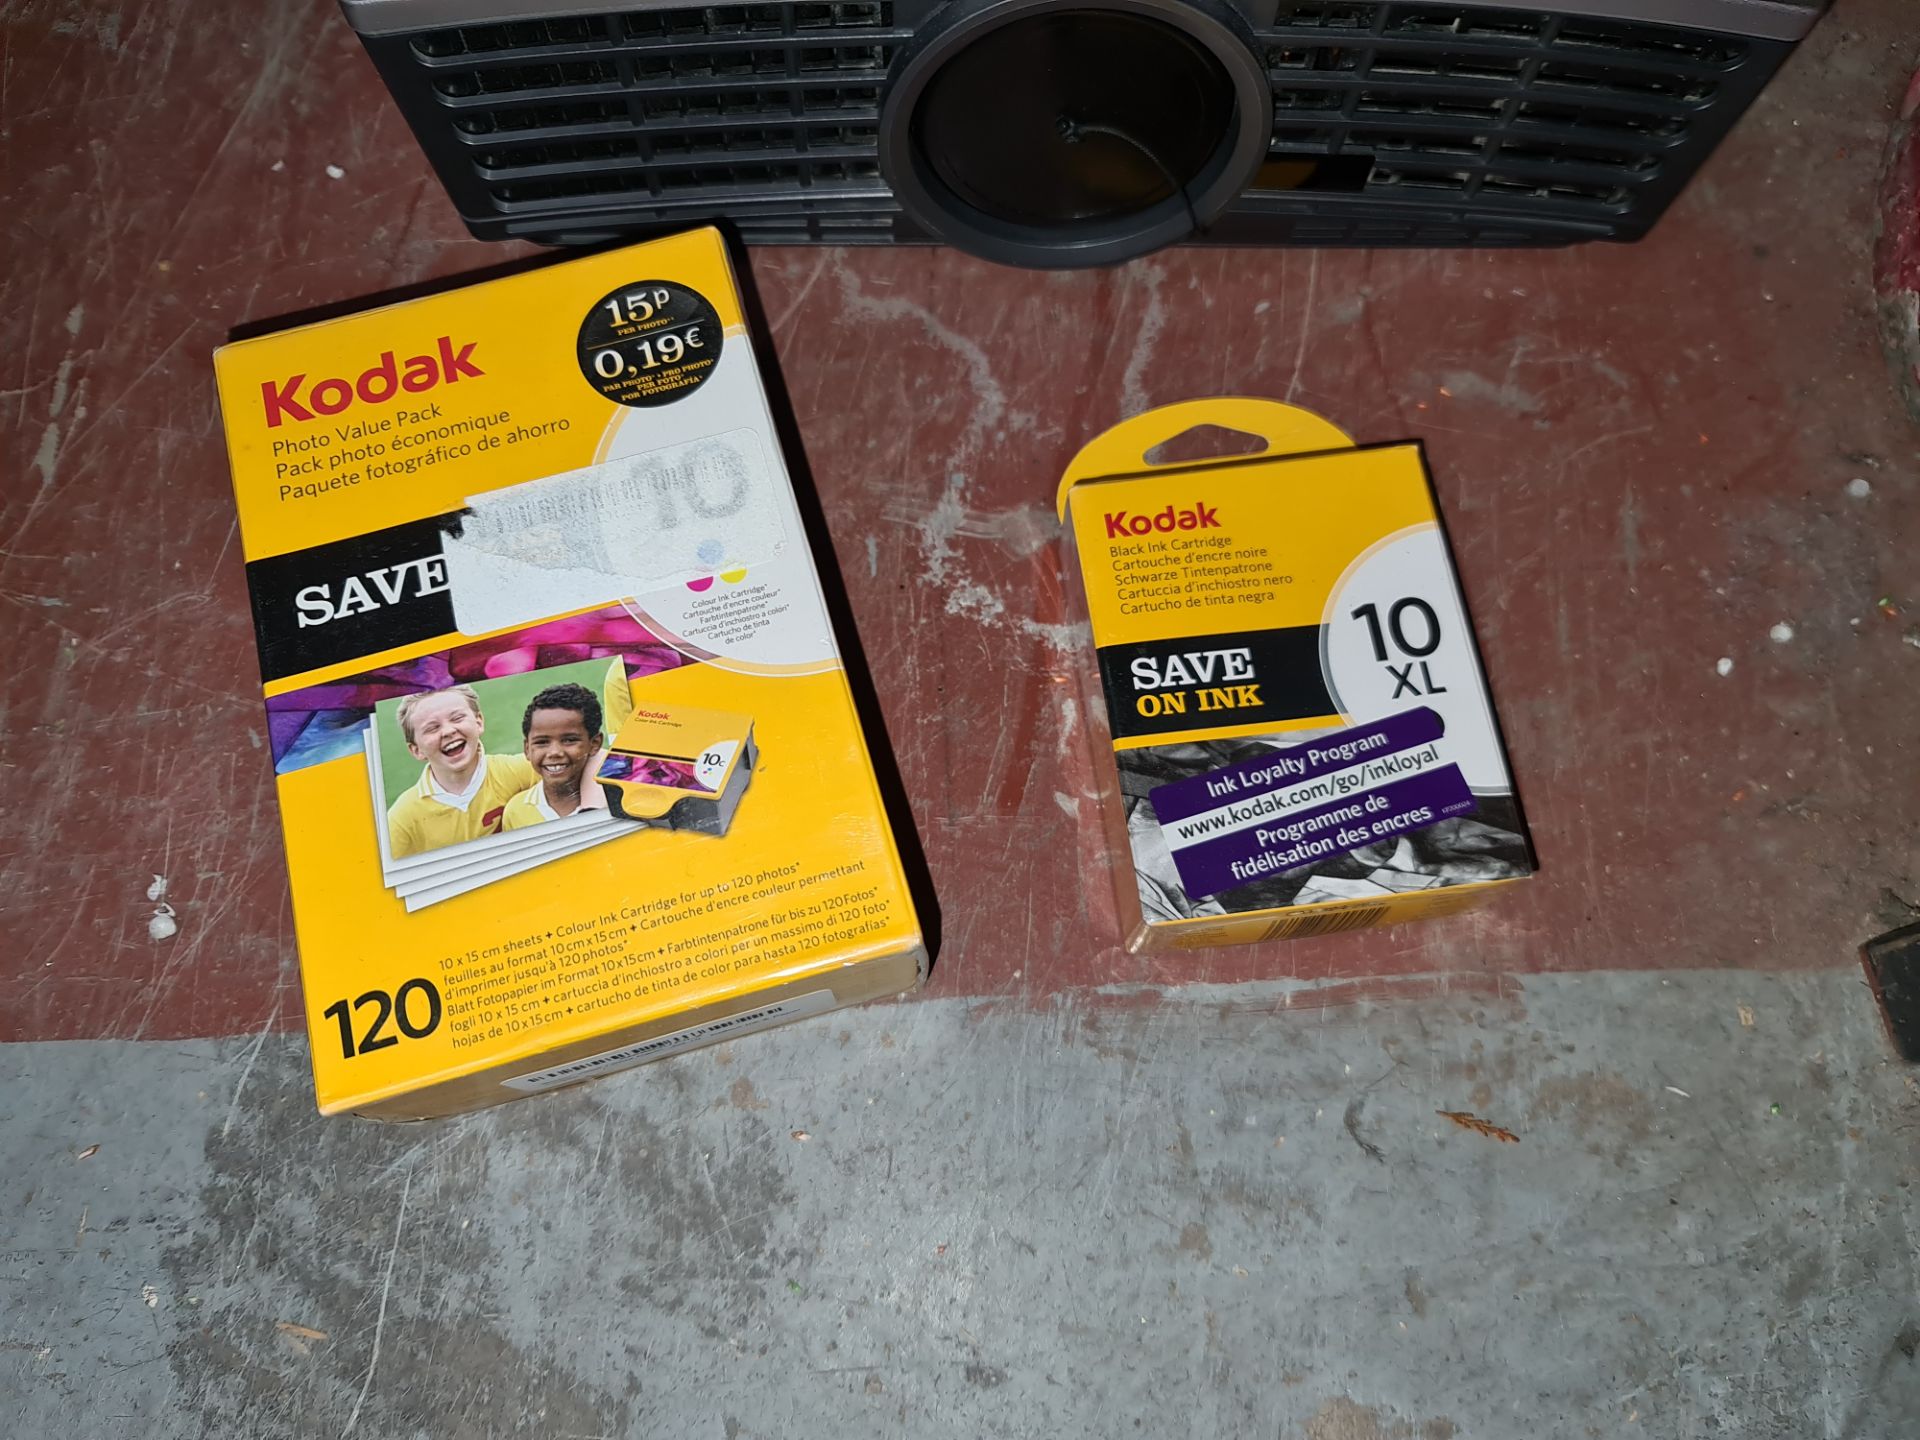 Contents of a bay of printers, plus projector and Kodak ink cartridges - Image 9 of 12